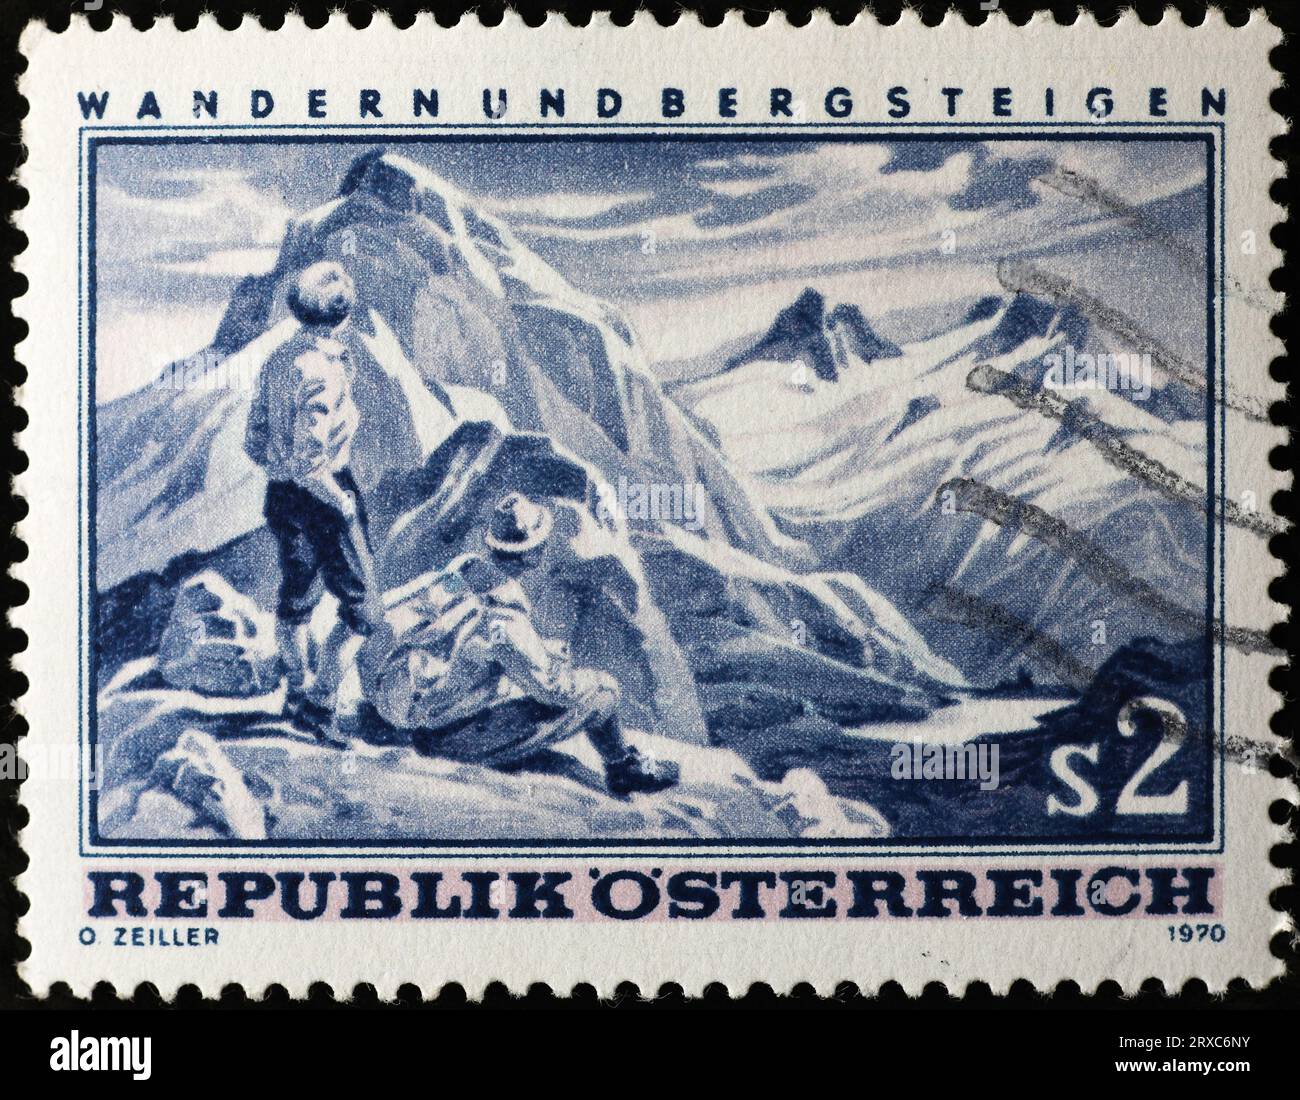 Hiking and mountaineering celebrated on vintage austrian stamp Stock Photo